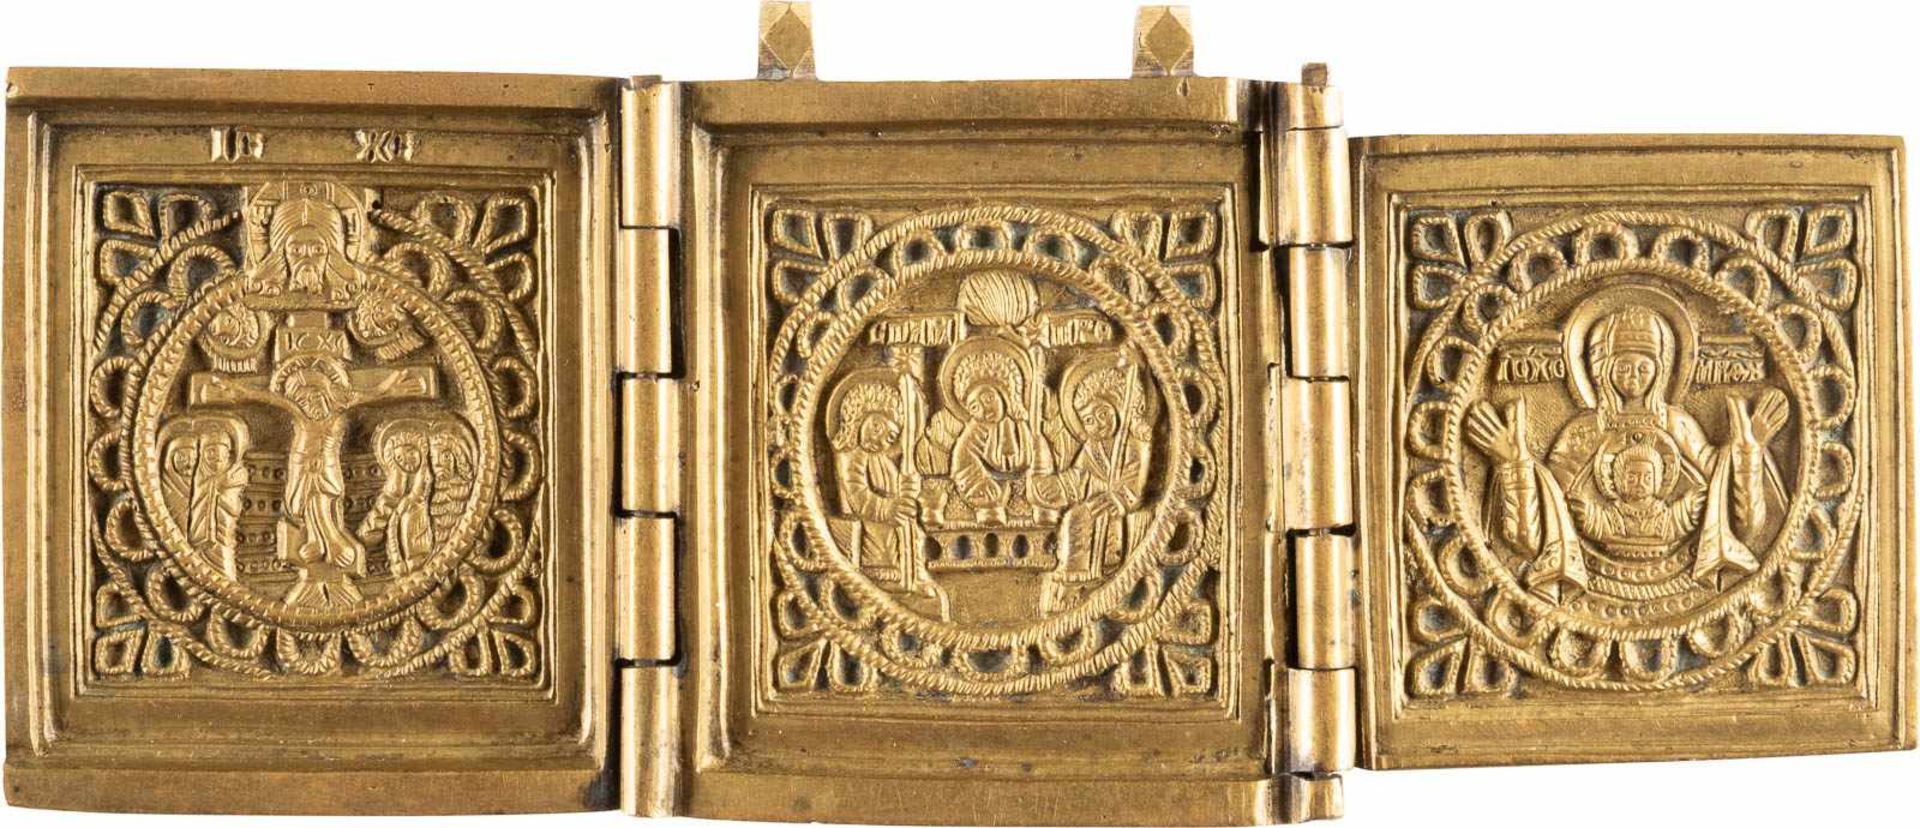 A RARE BRASS TRIPTYCH SHOWING THE CRUCIFIXION, THE OLD TESTAMENT TRINITY AND THE MOTHER OF